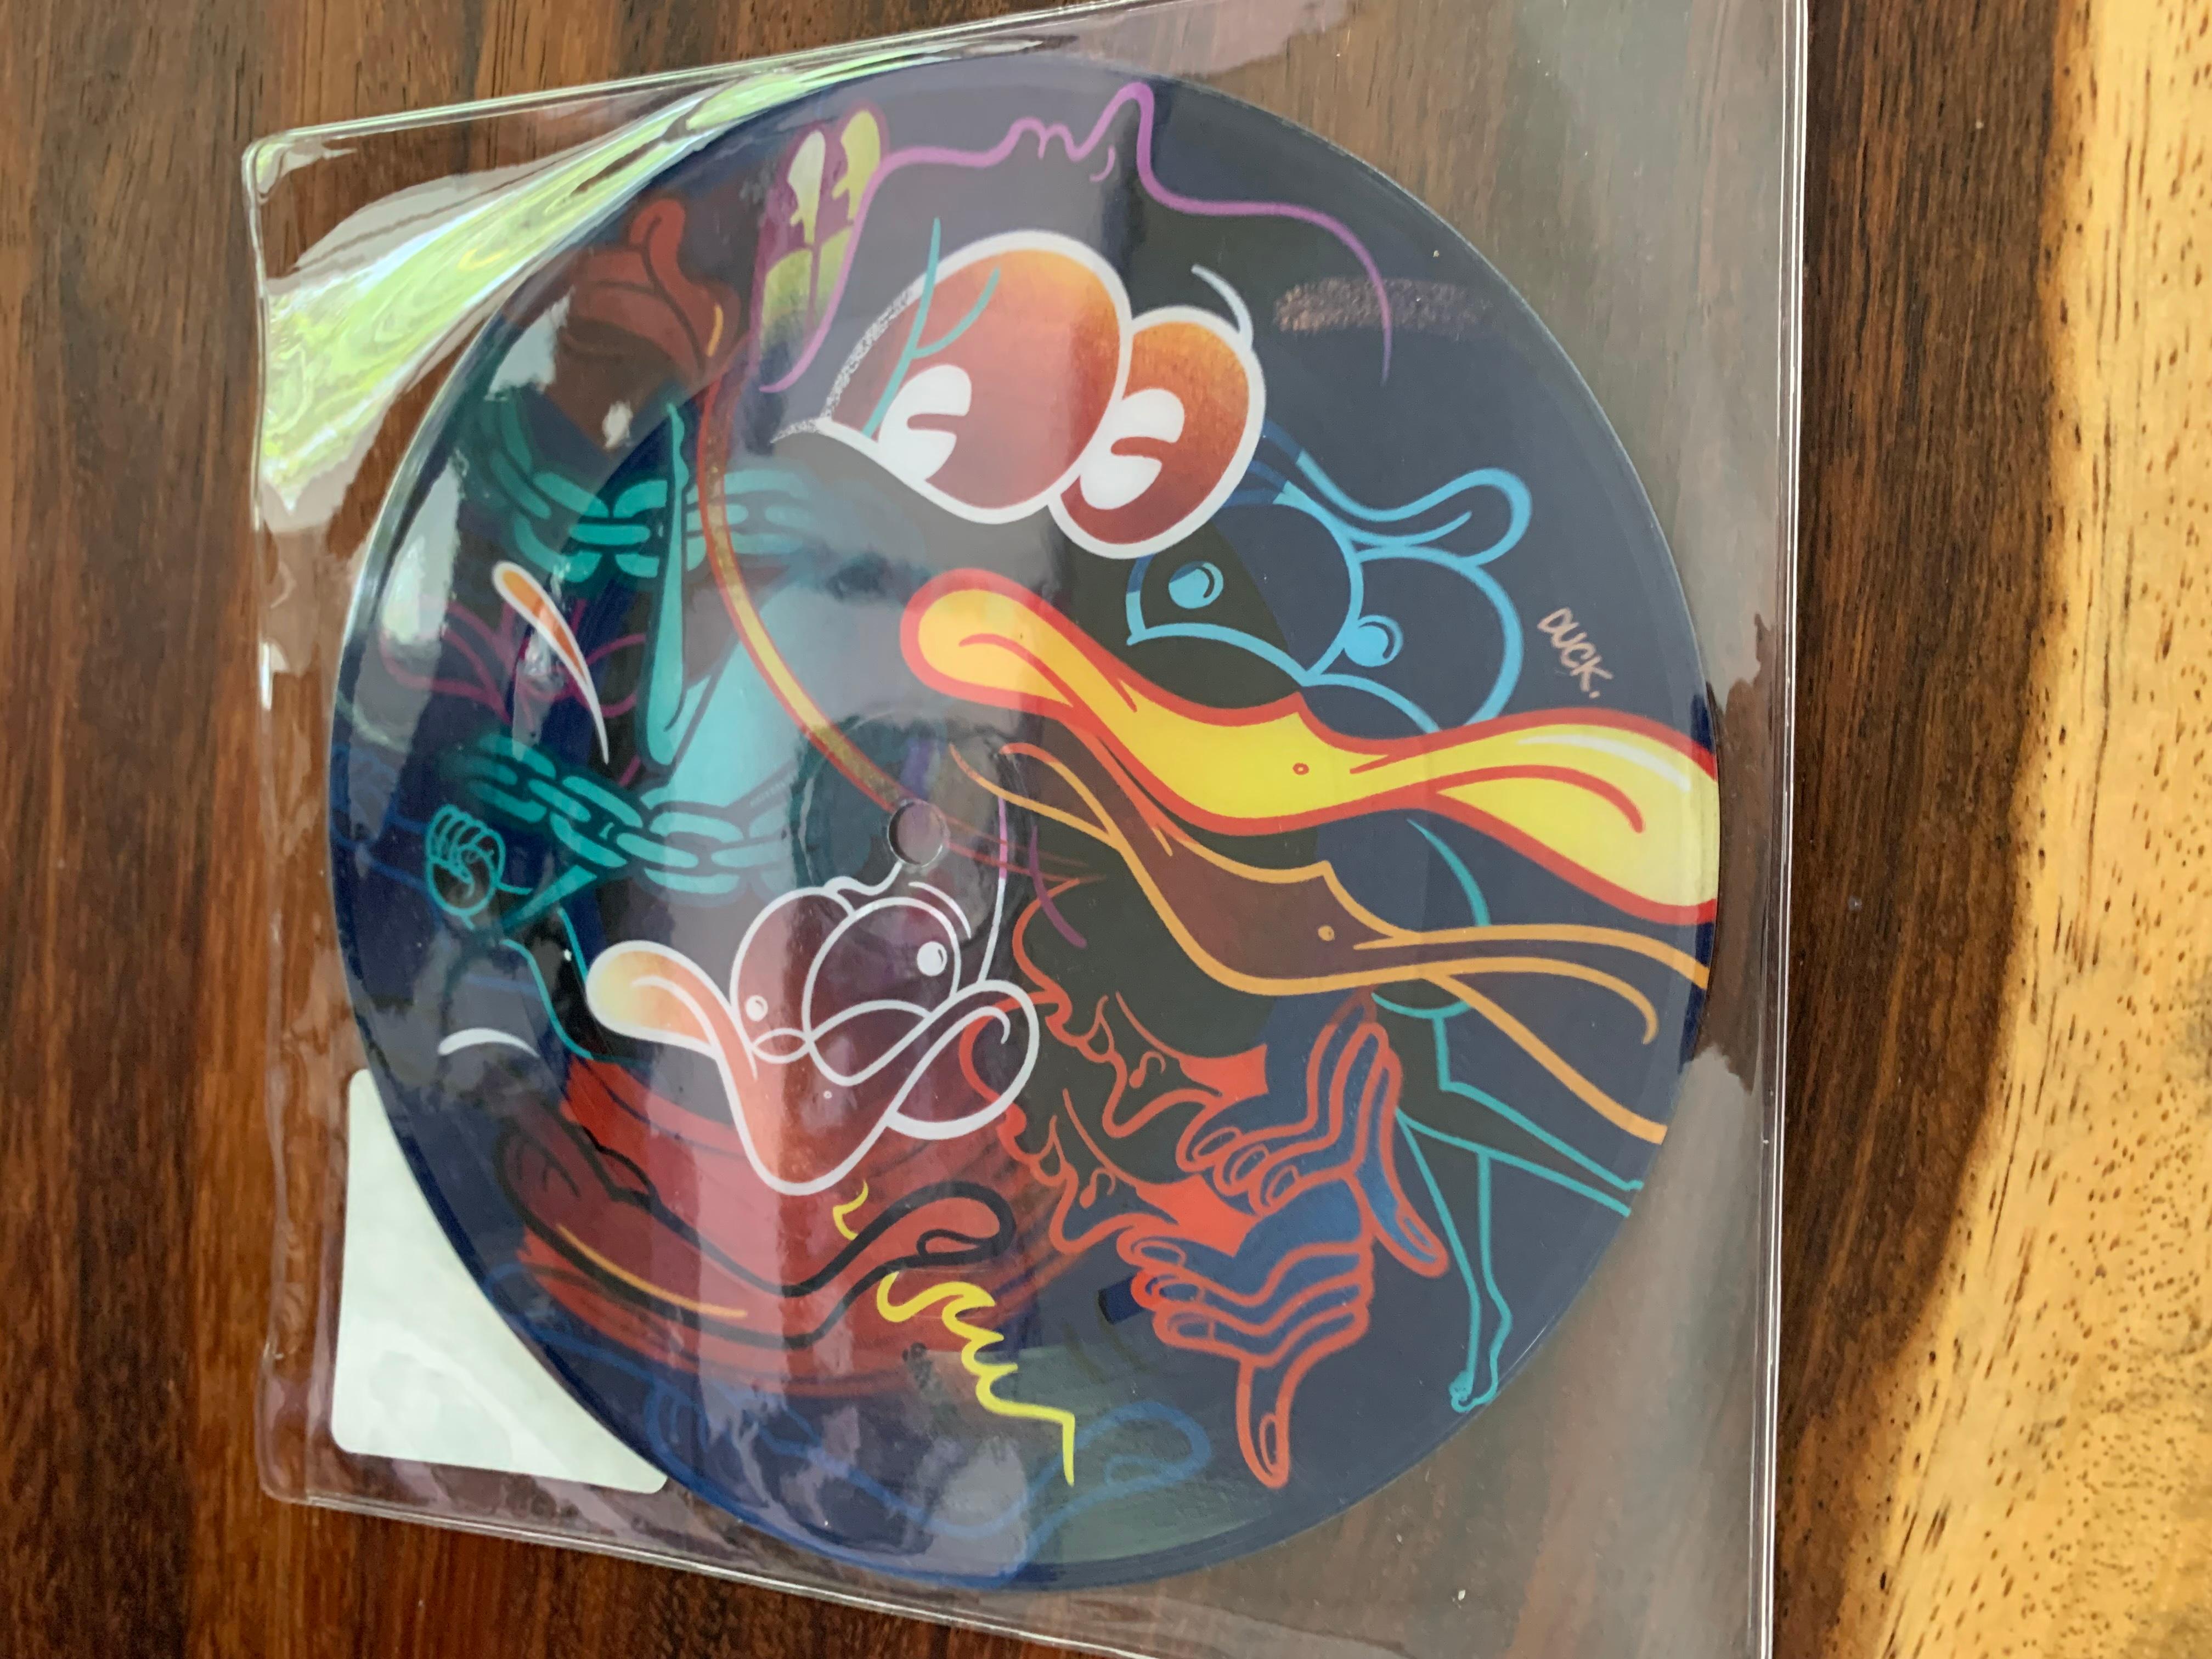 Jersey Joe (RiME) Abstract Print – Duck Sauce - Captain Duck / I Don't Mind Limited Edition Vinyl by POSE 7"